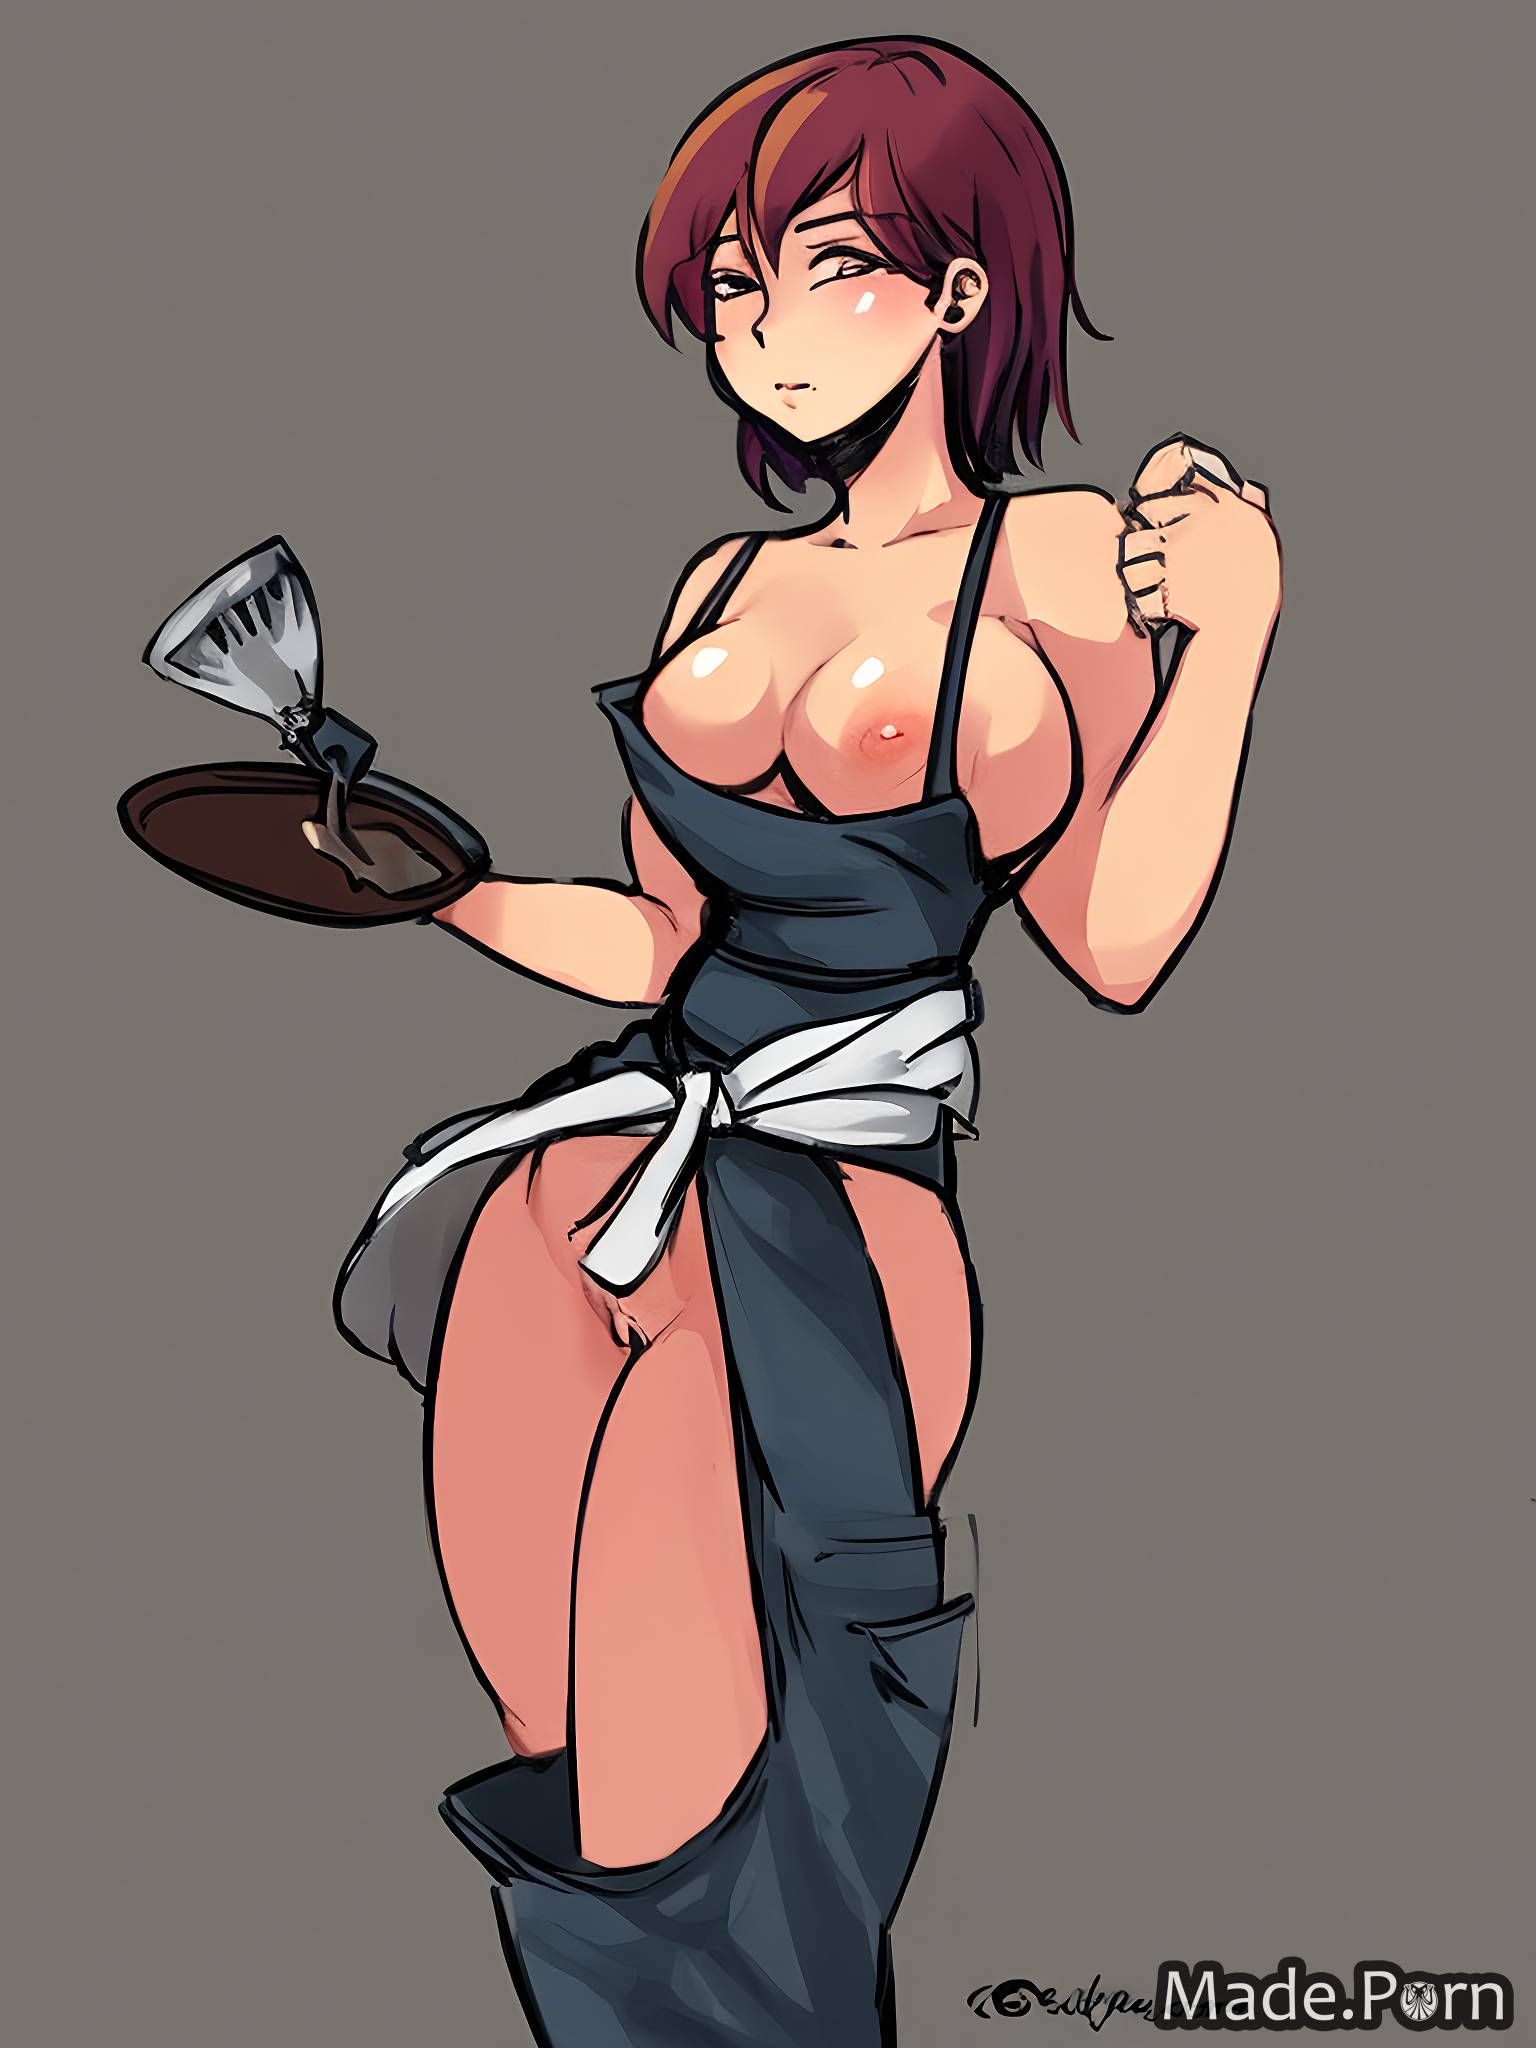 1536px x 2048px - Porn image of nude apron Cartoon created by AI